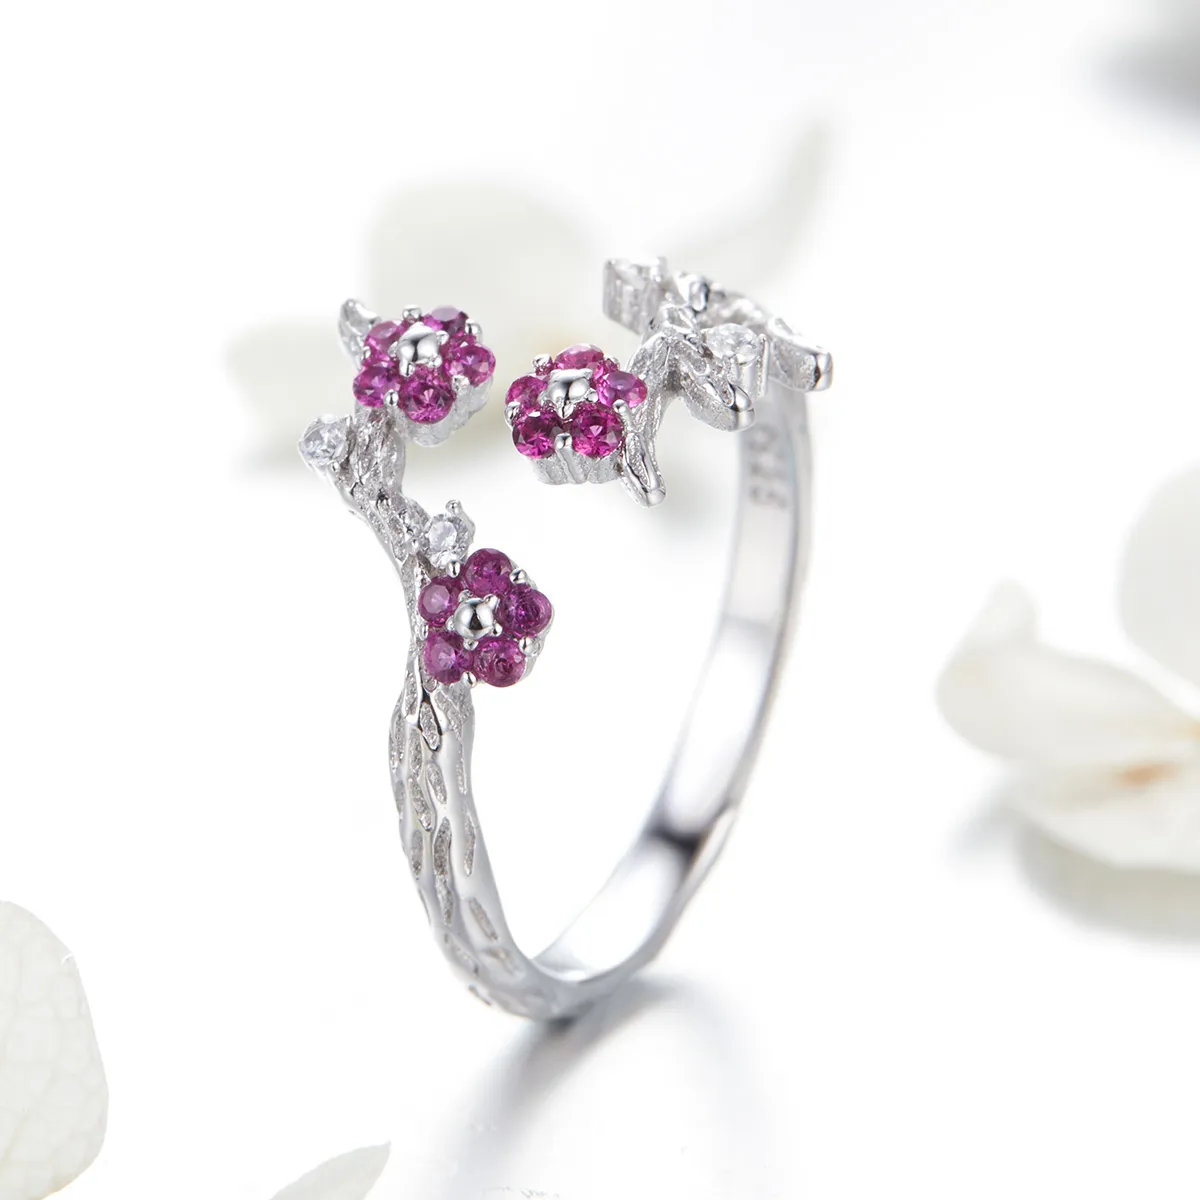 Pandora Style Silver Plum blossom Open Ring - BSR022